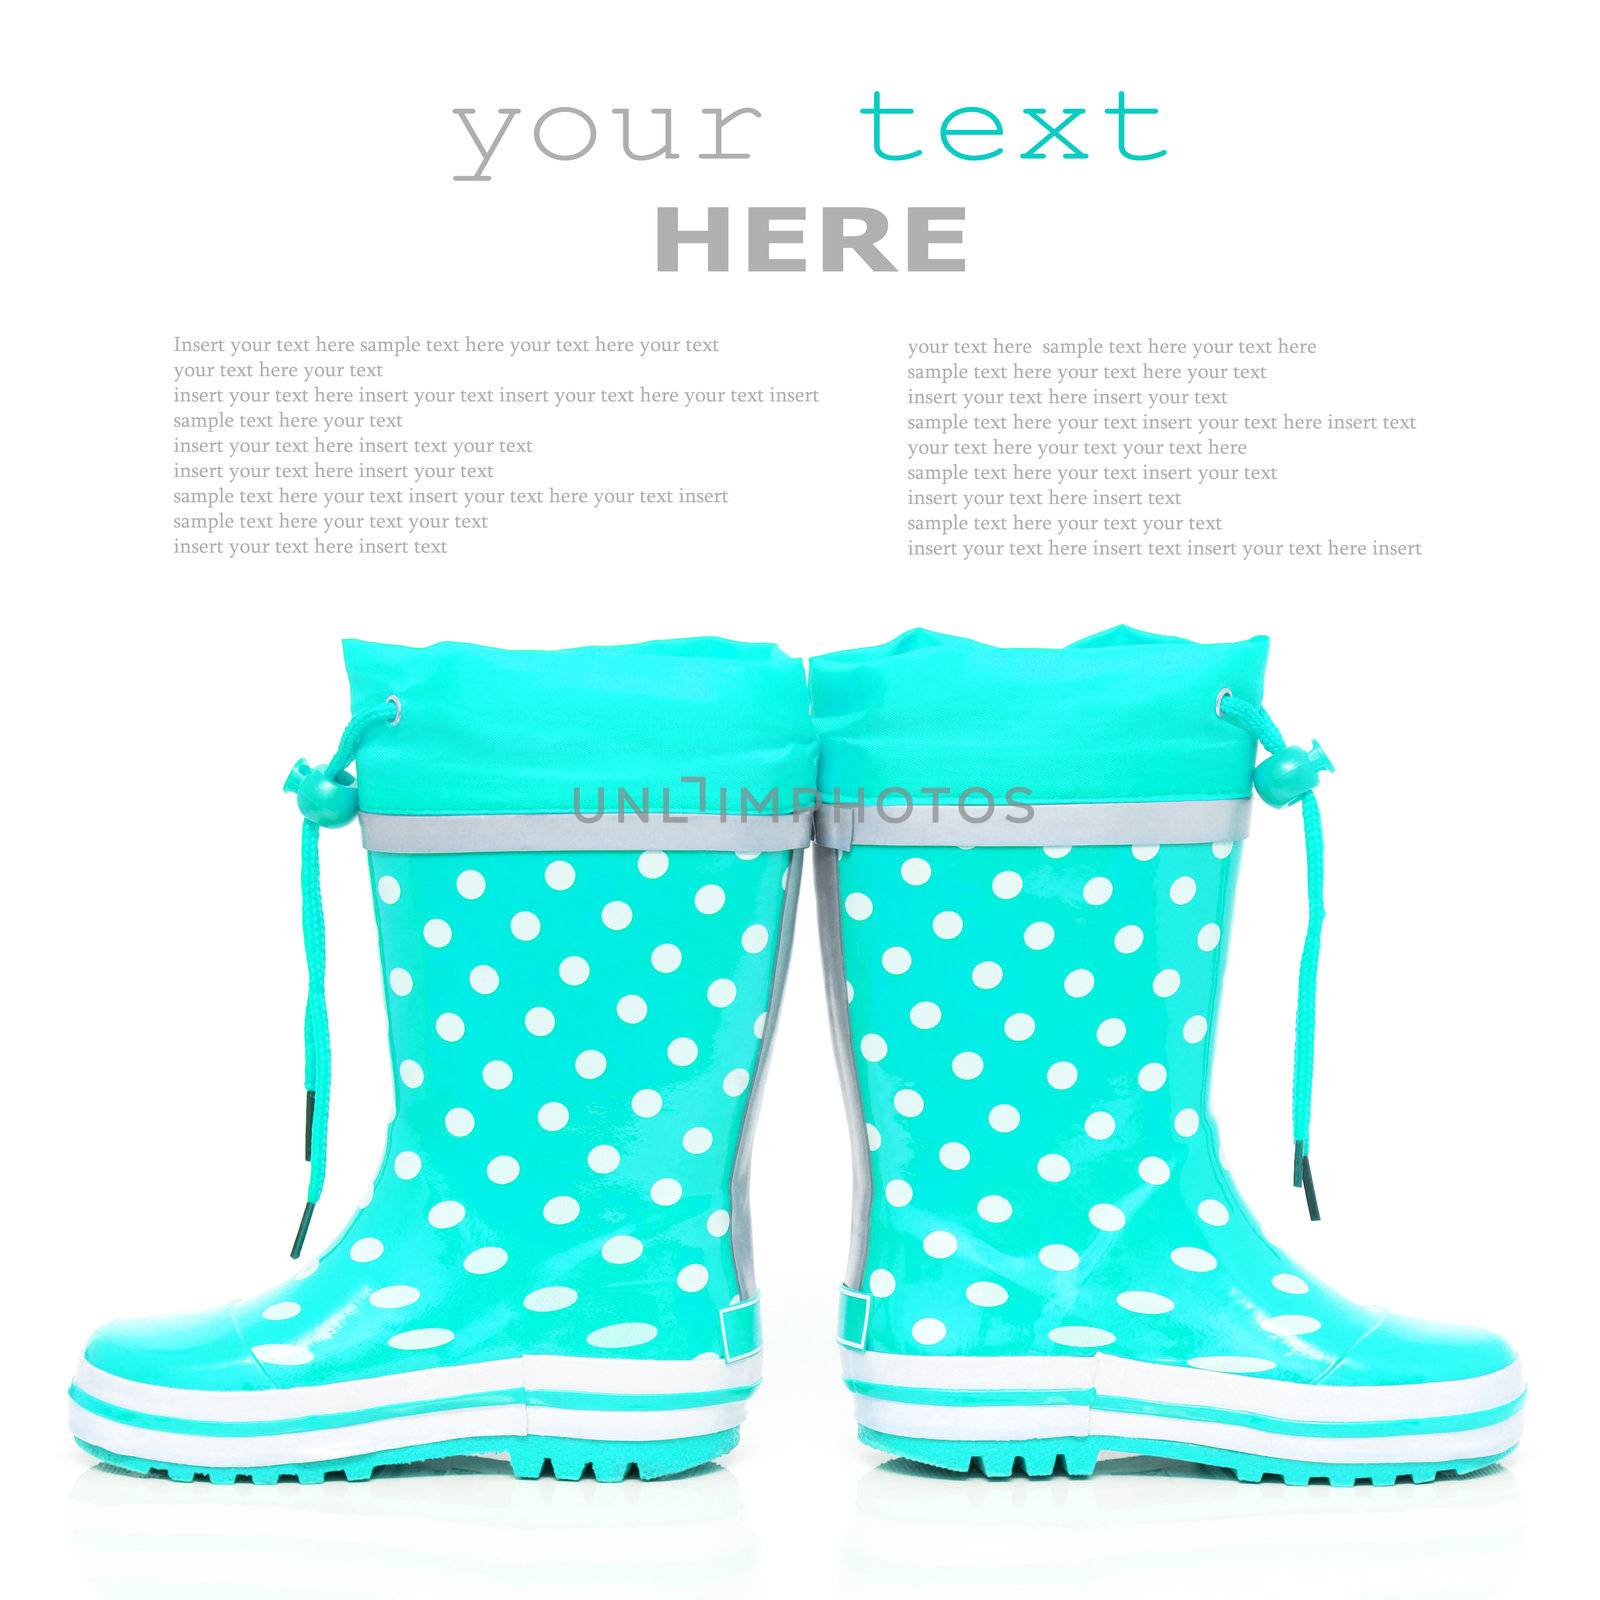 Cyan rubber boots  by Olinkau